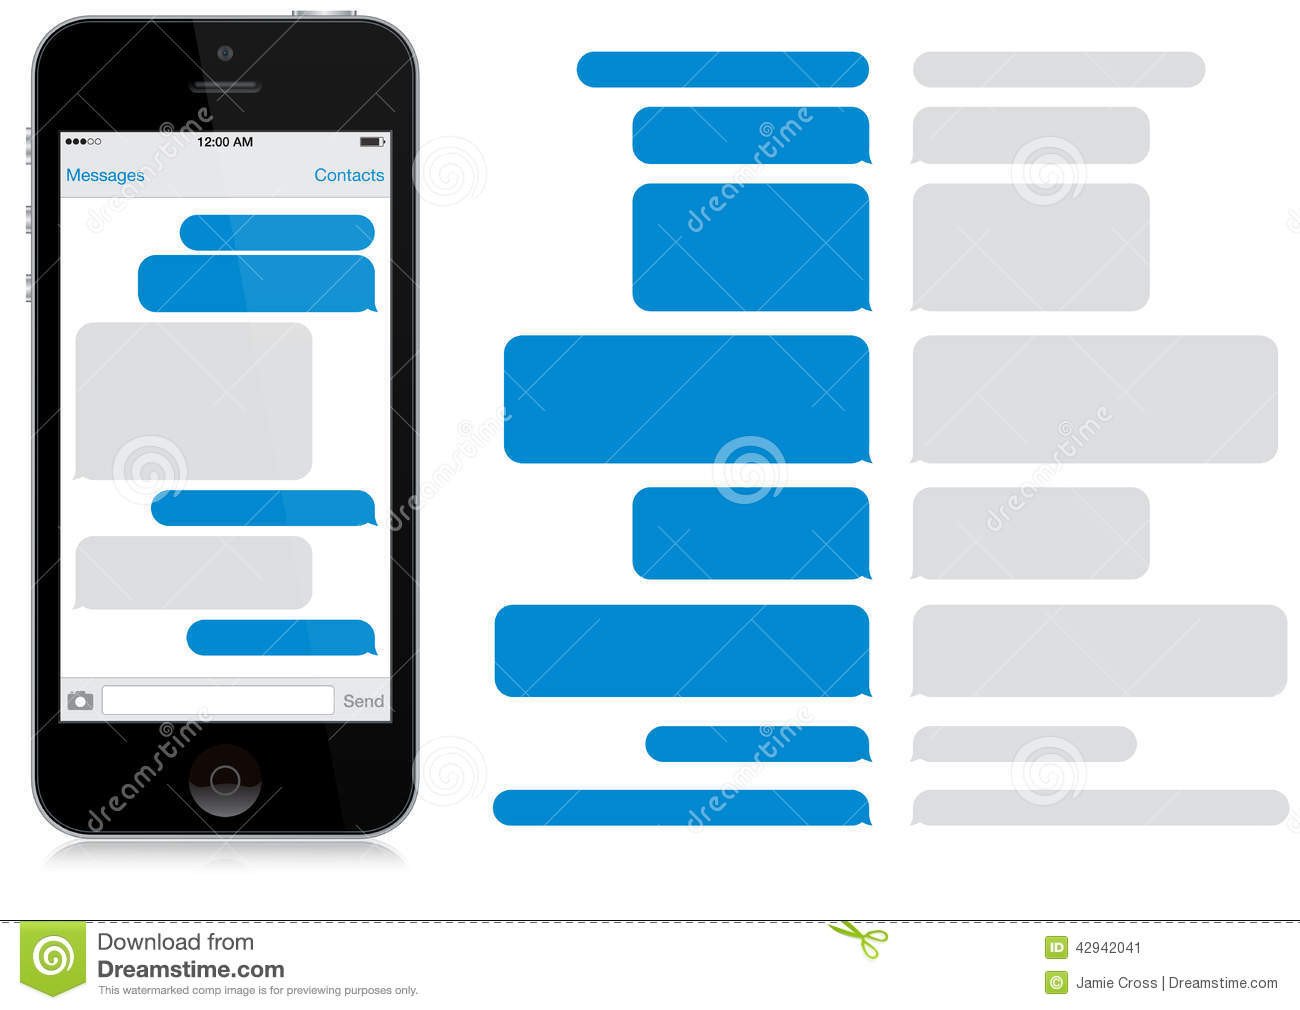 Smart Phone Chat Window App Editorial Image of